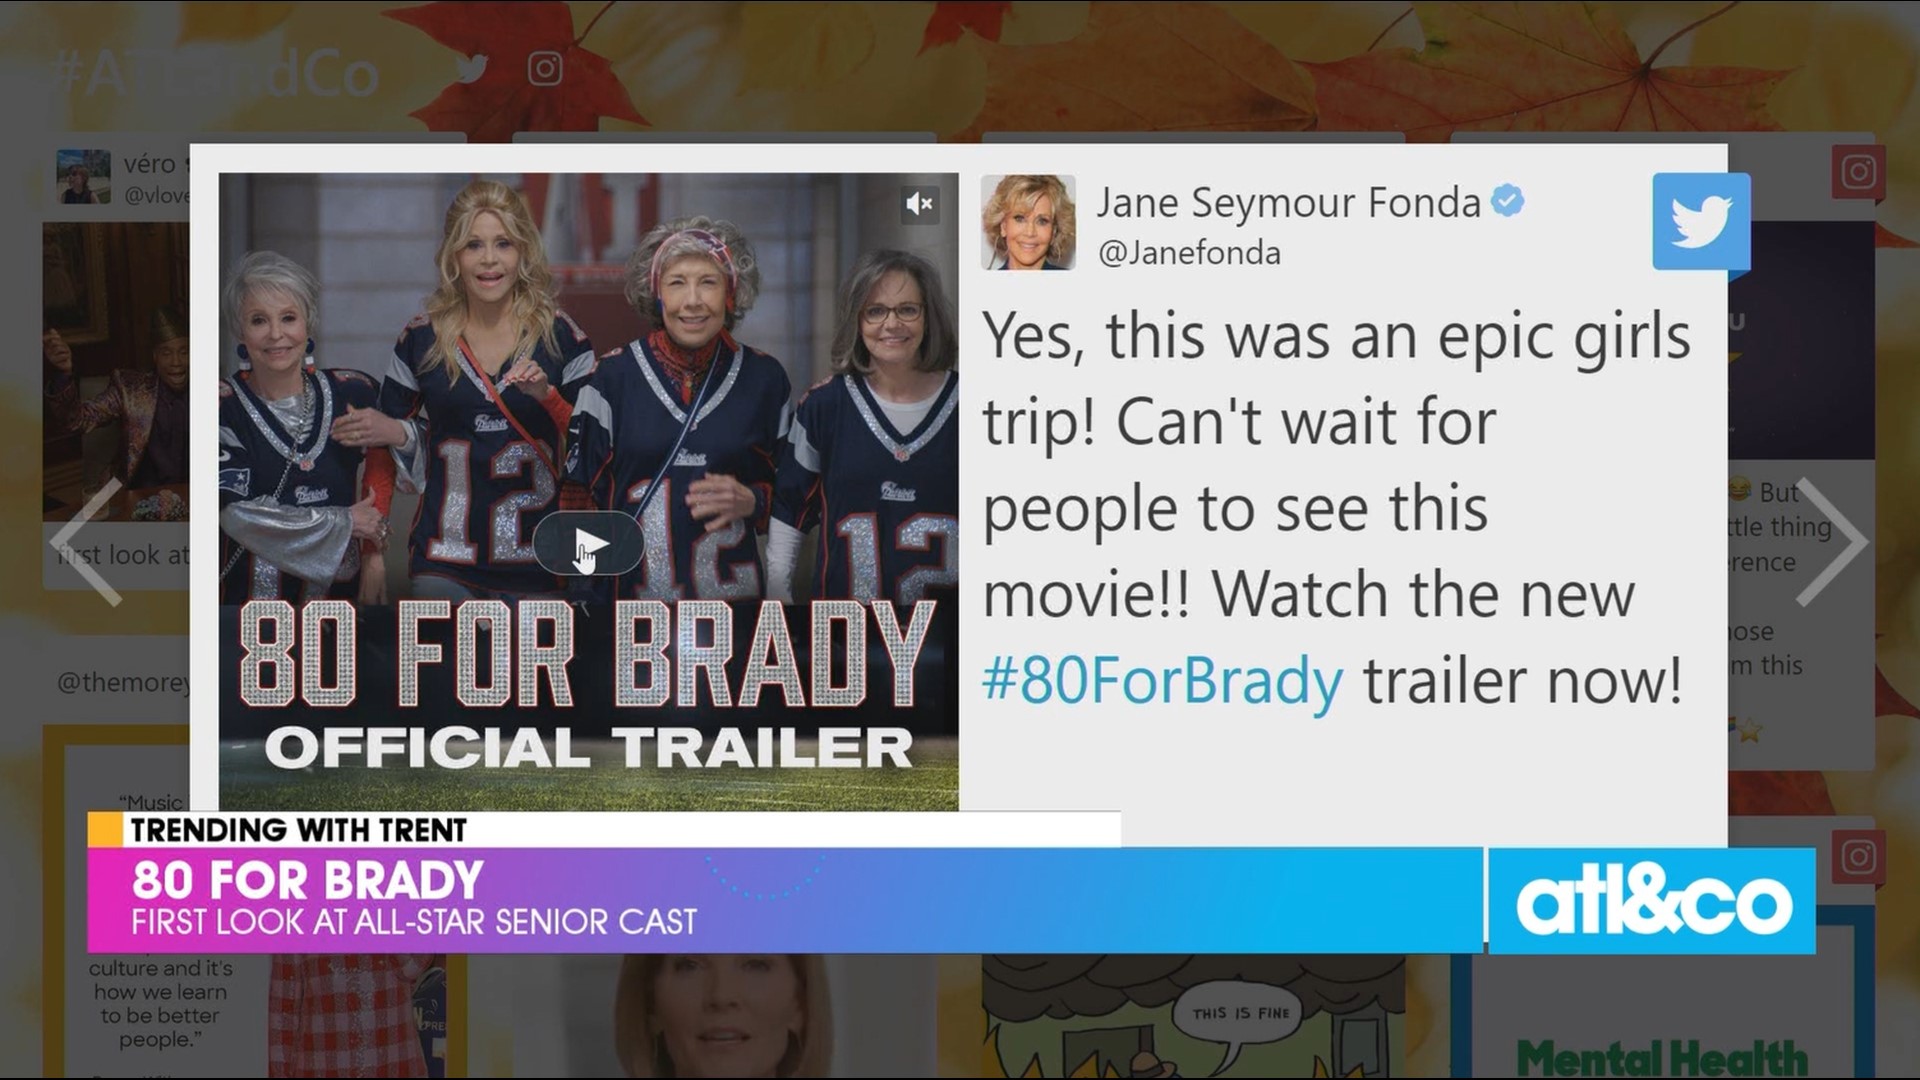 An all-star senior cast, including Rita Moreno and Sally Field, is ready to score a touchdown in this Tom Brady-produced film.